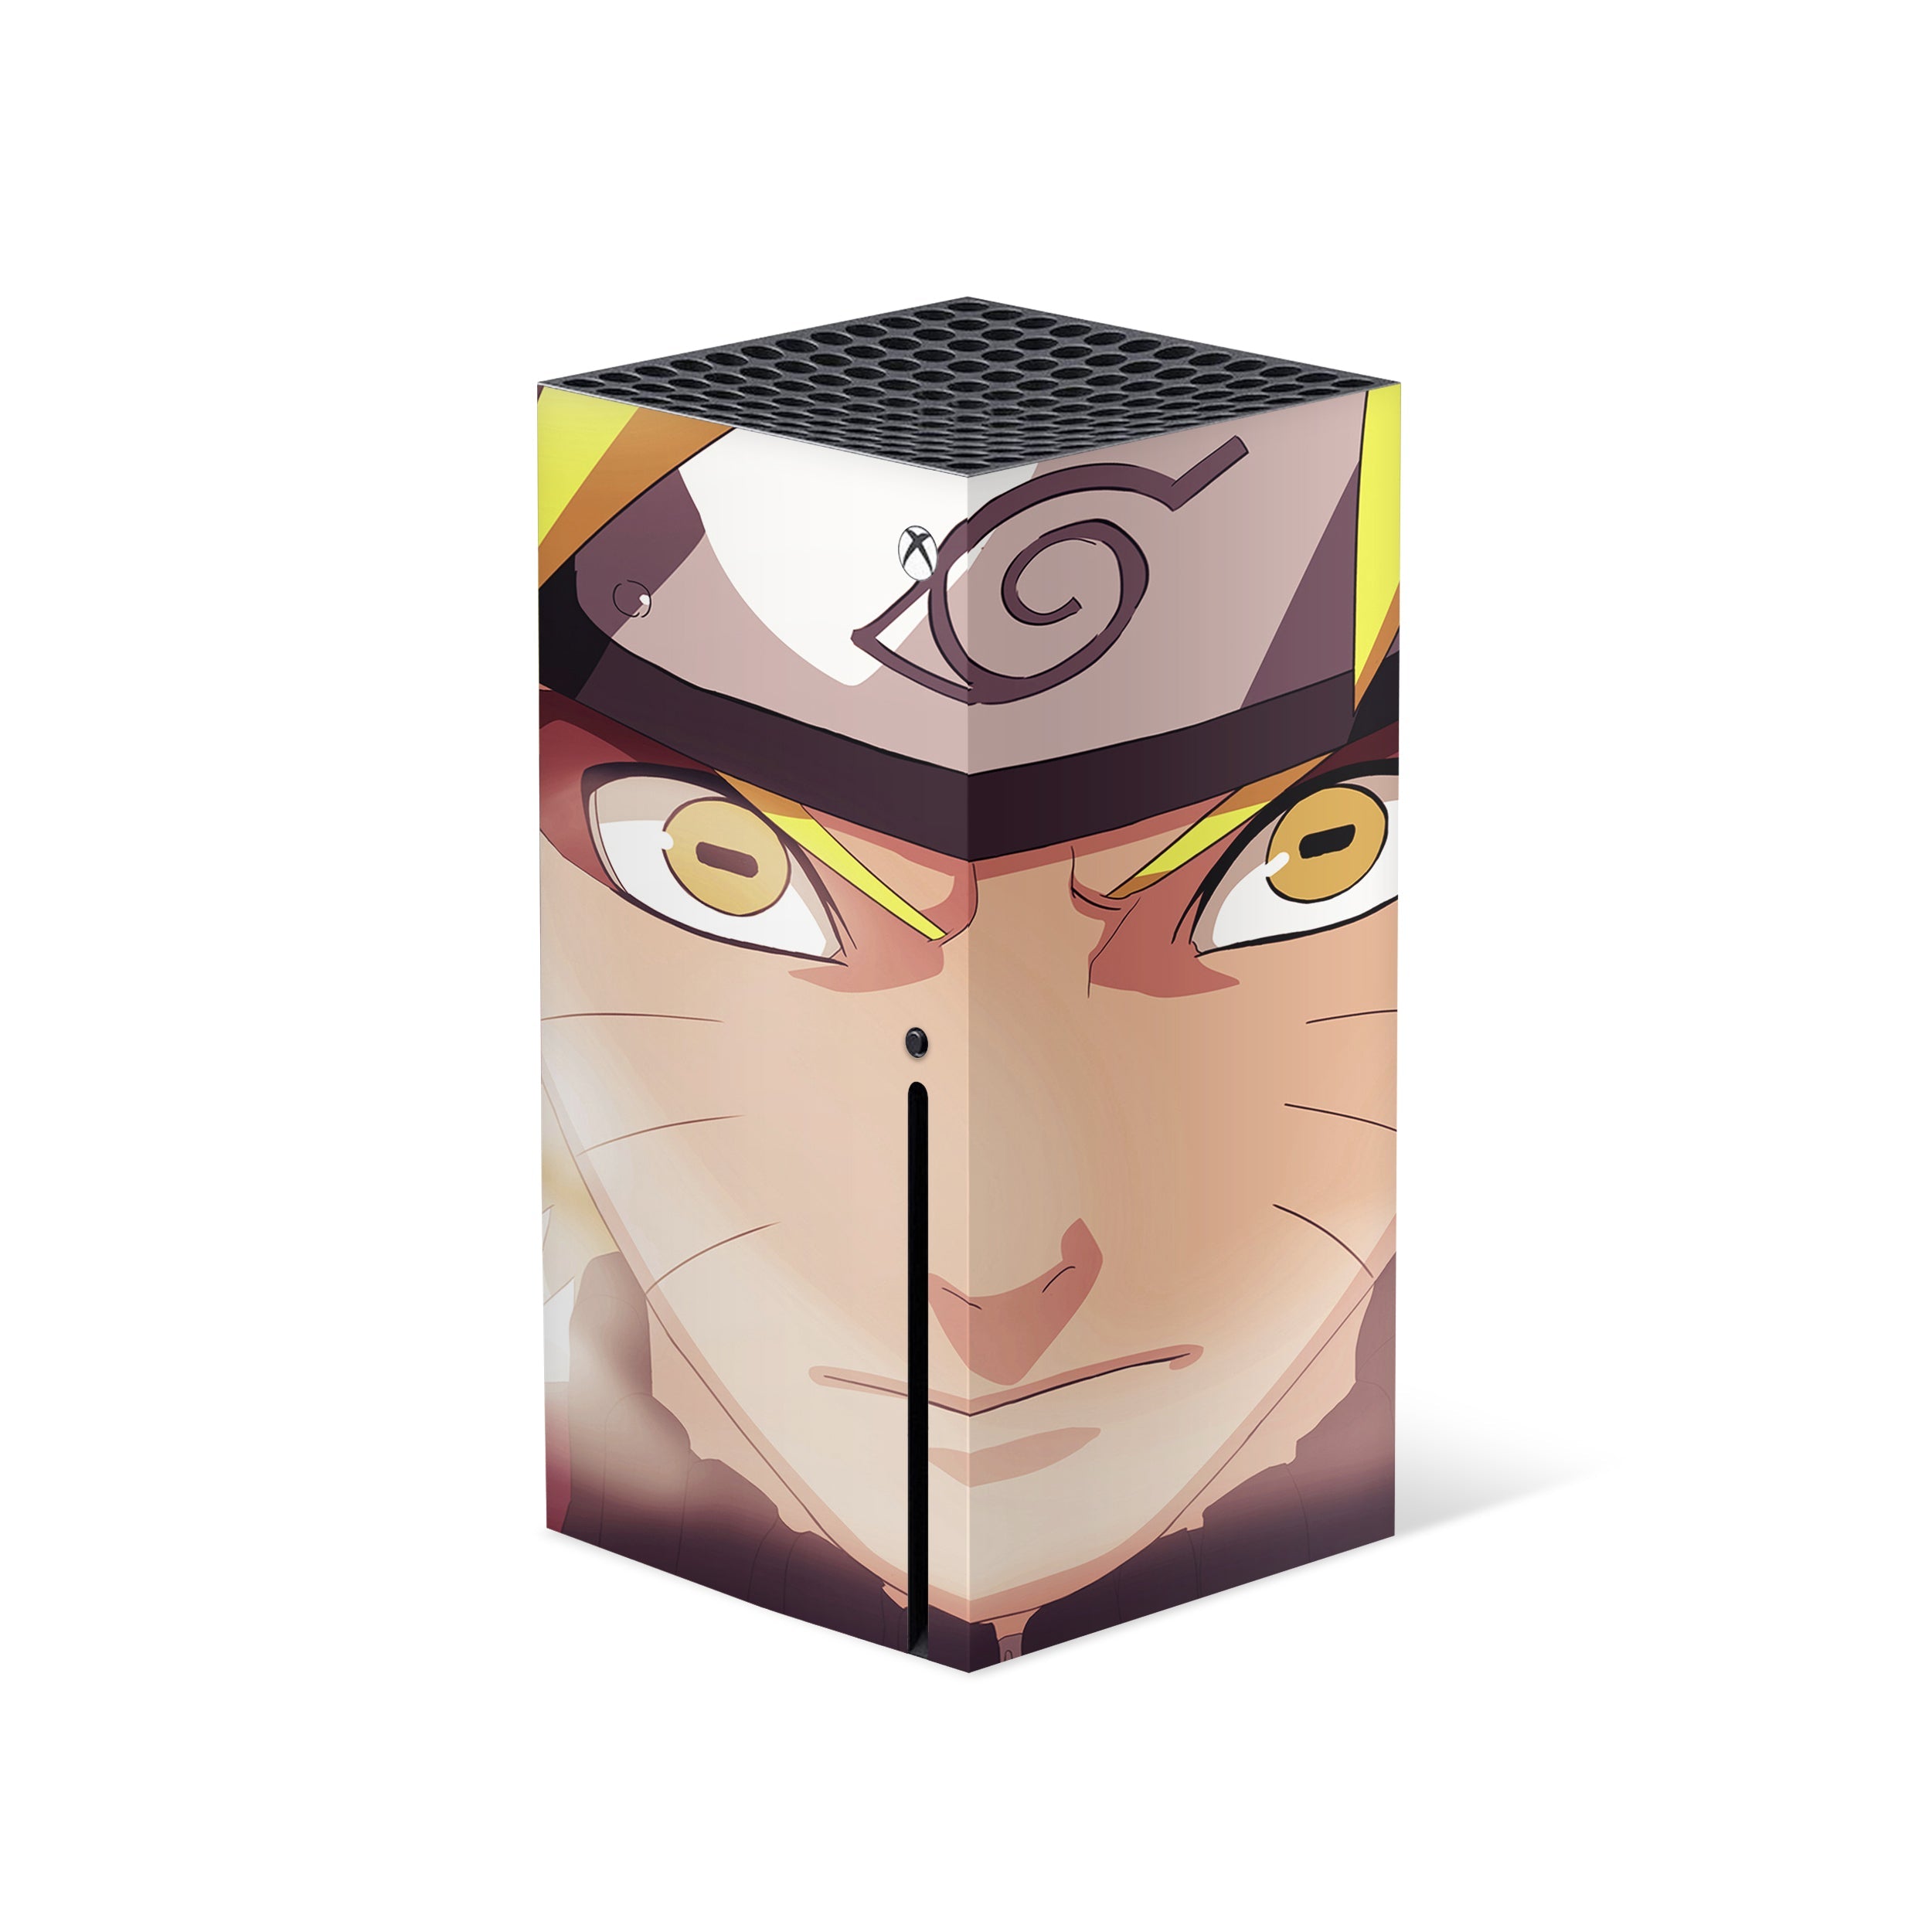 A video game skin featuring a Naruto design for the Xbox Series X.